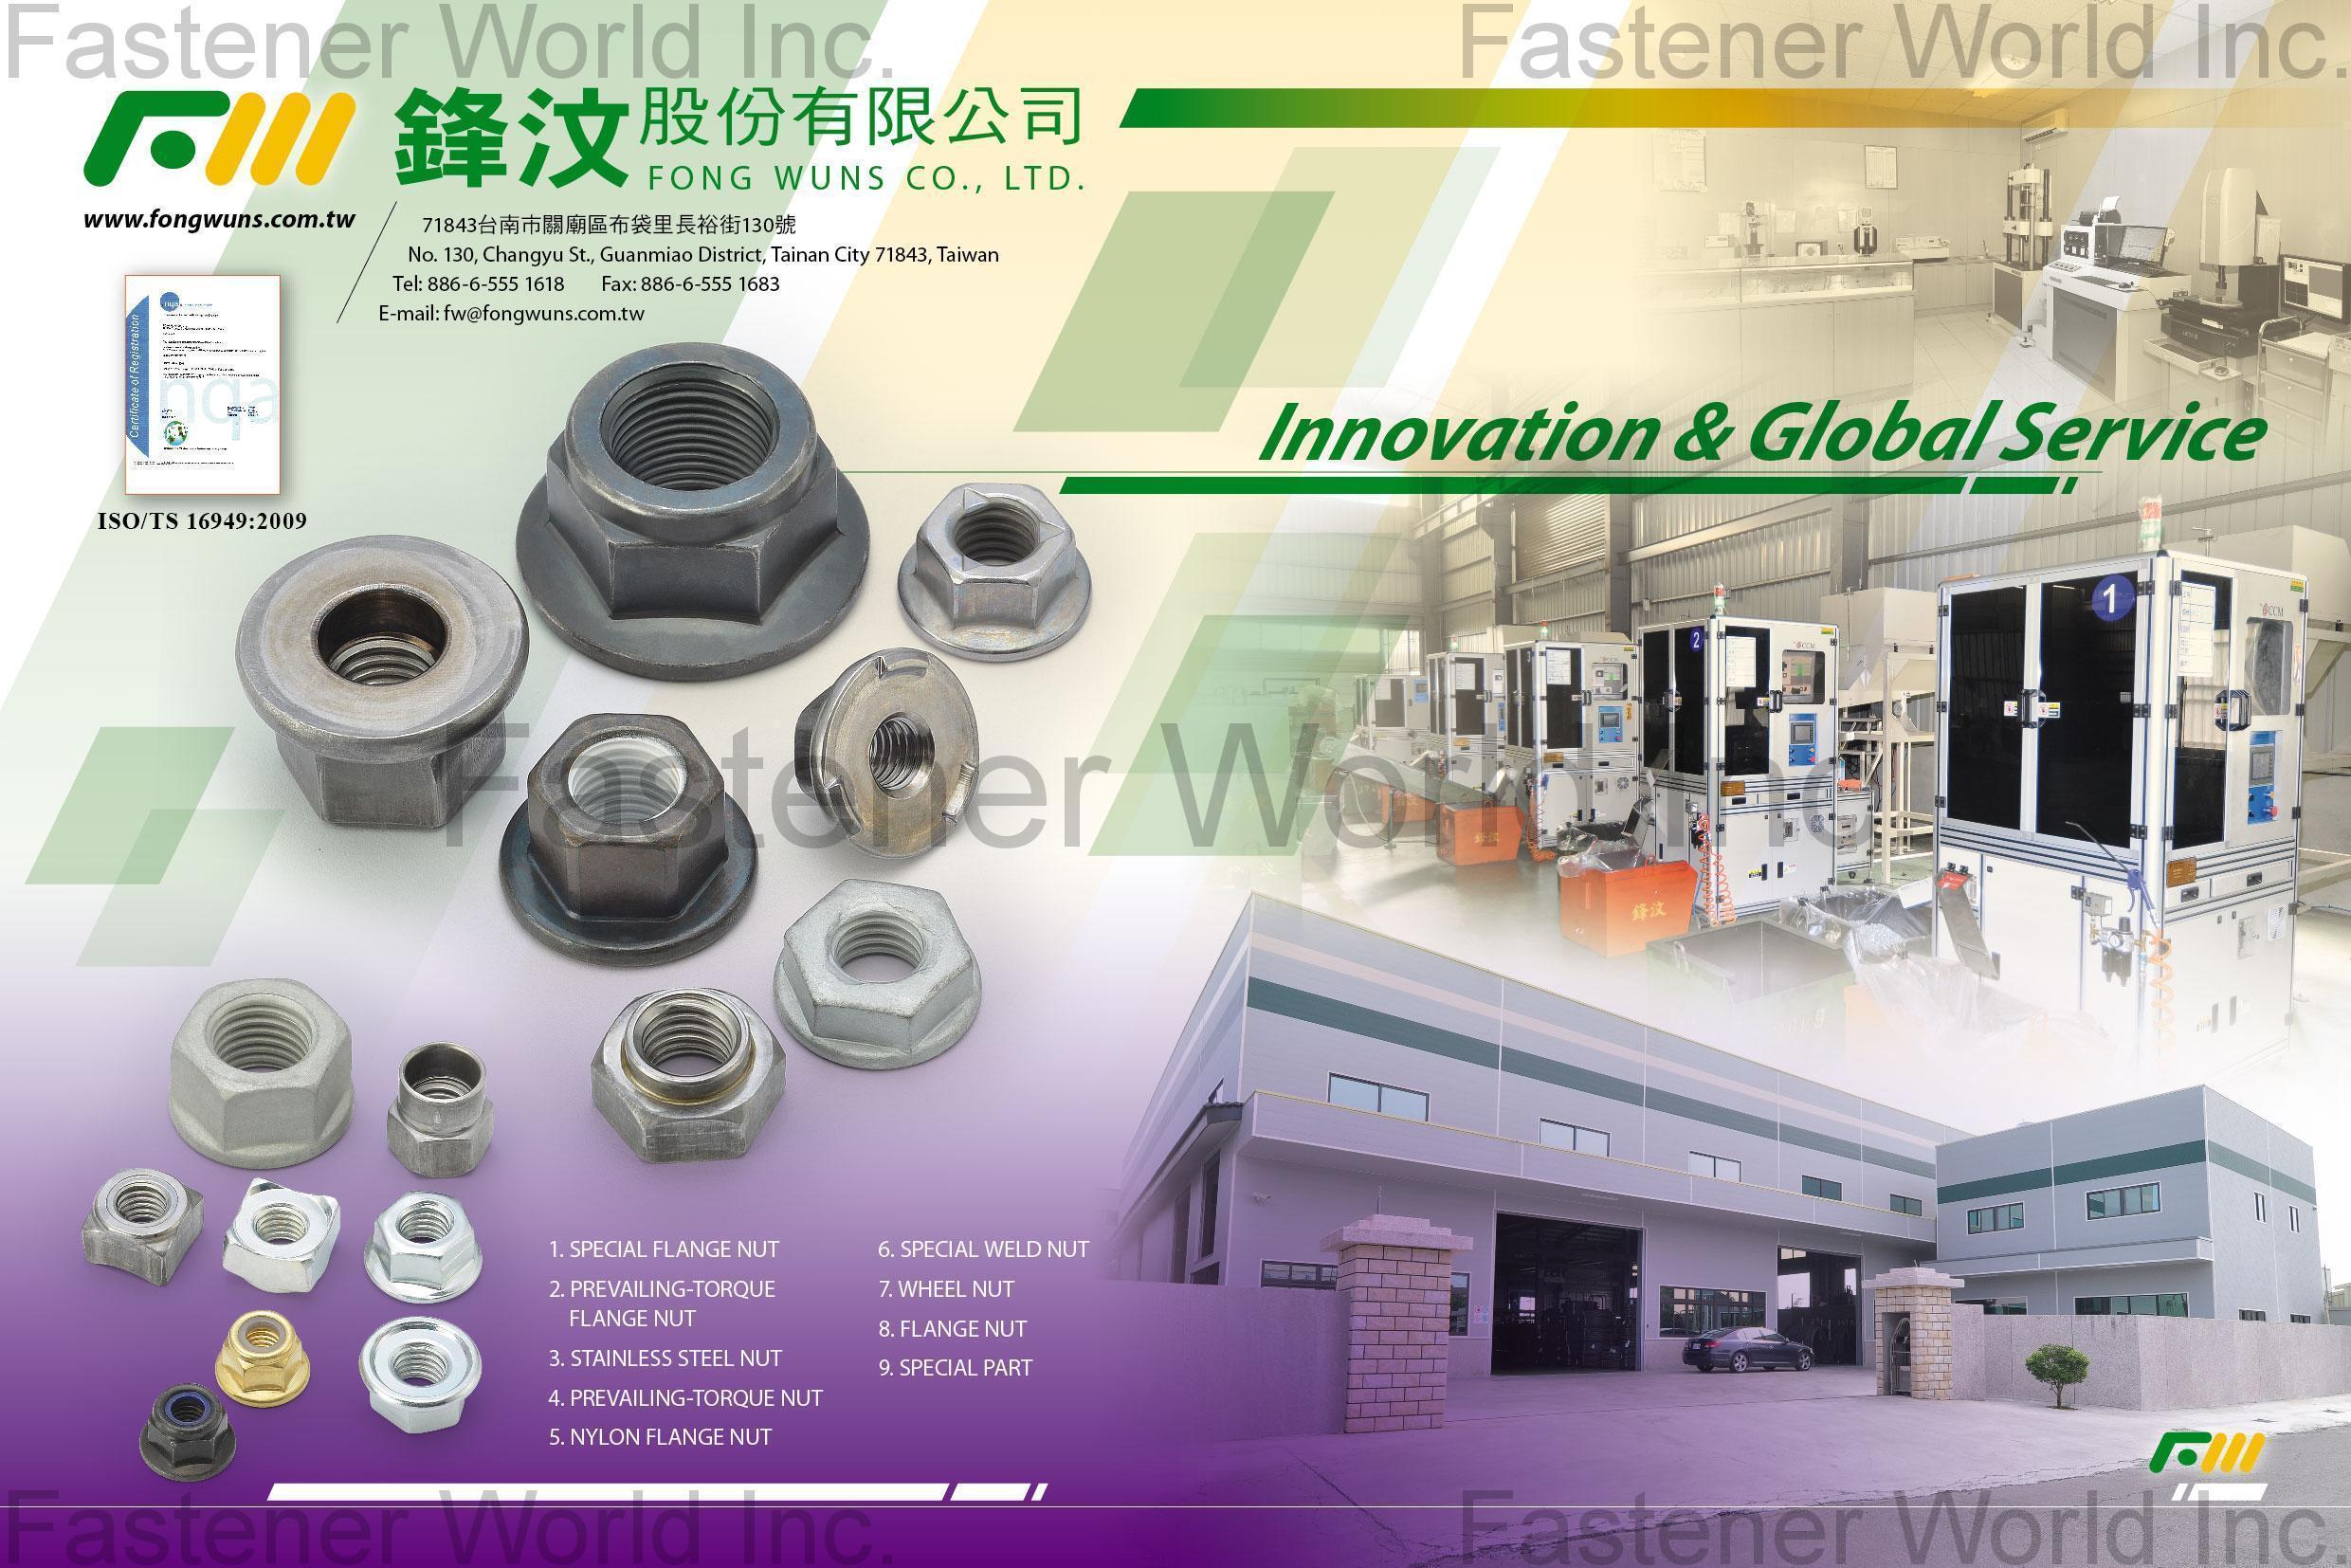 FONG WUNS CO., LTD.  , Special Flange Nut, Prevailing-Torque Flange Nut, Stainless Steel Nut ,Prevailing-Torque Nut, Nylon Flange Nut, Special Weld Nut, Wheel Nut, Flange Nut, Special Part , All Kinds Of Nuts